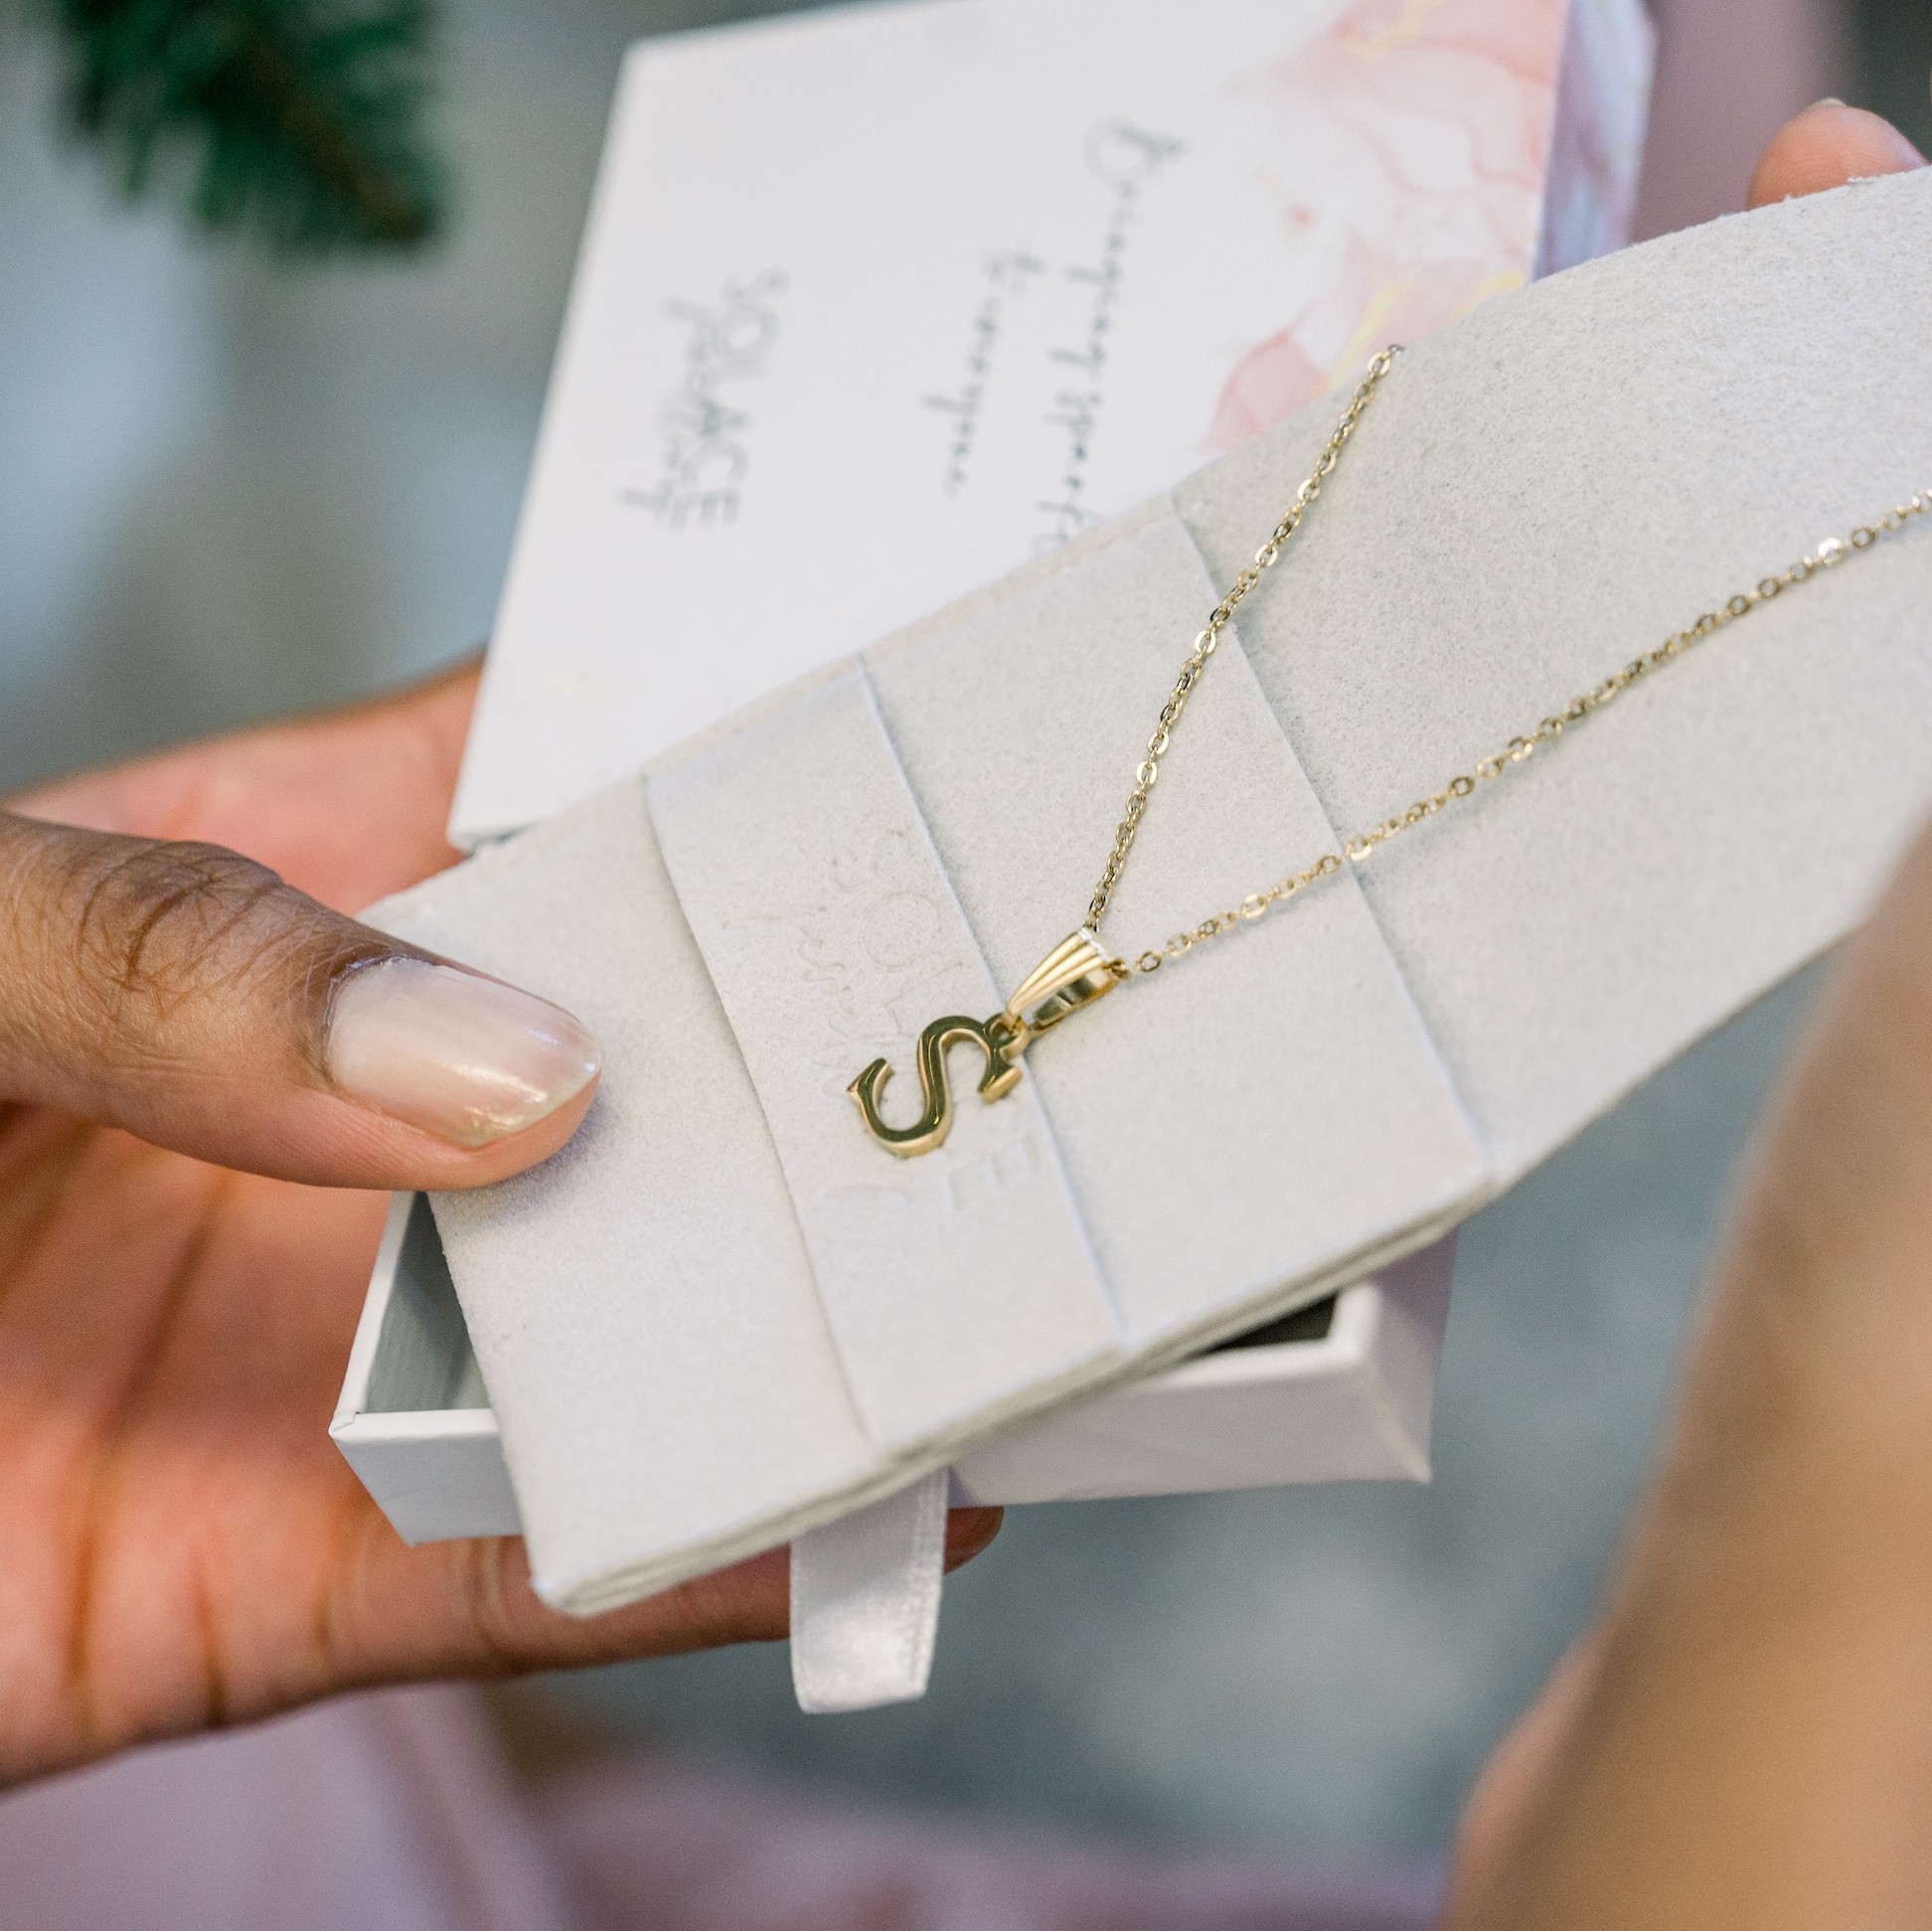 Gifts for her - initial pendant necklace